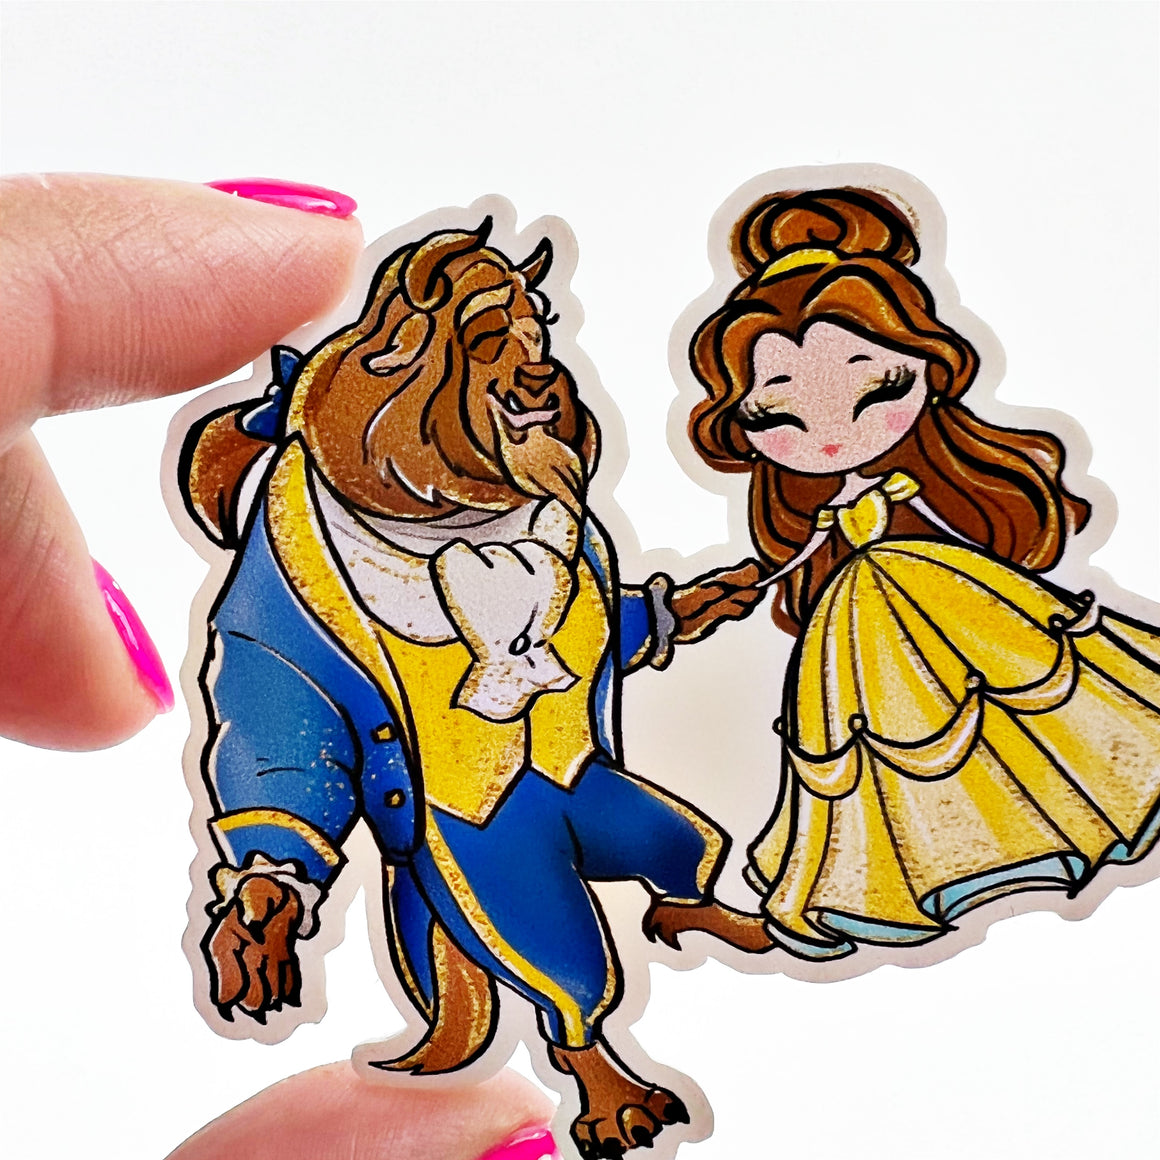 Beauty and the Beast Vinyl Decal